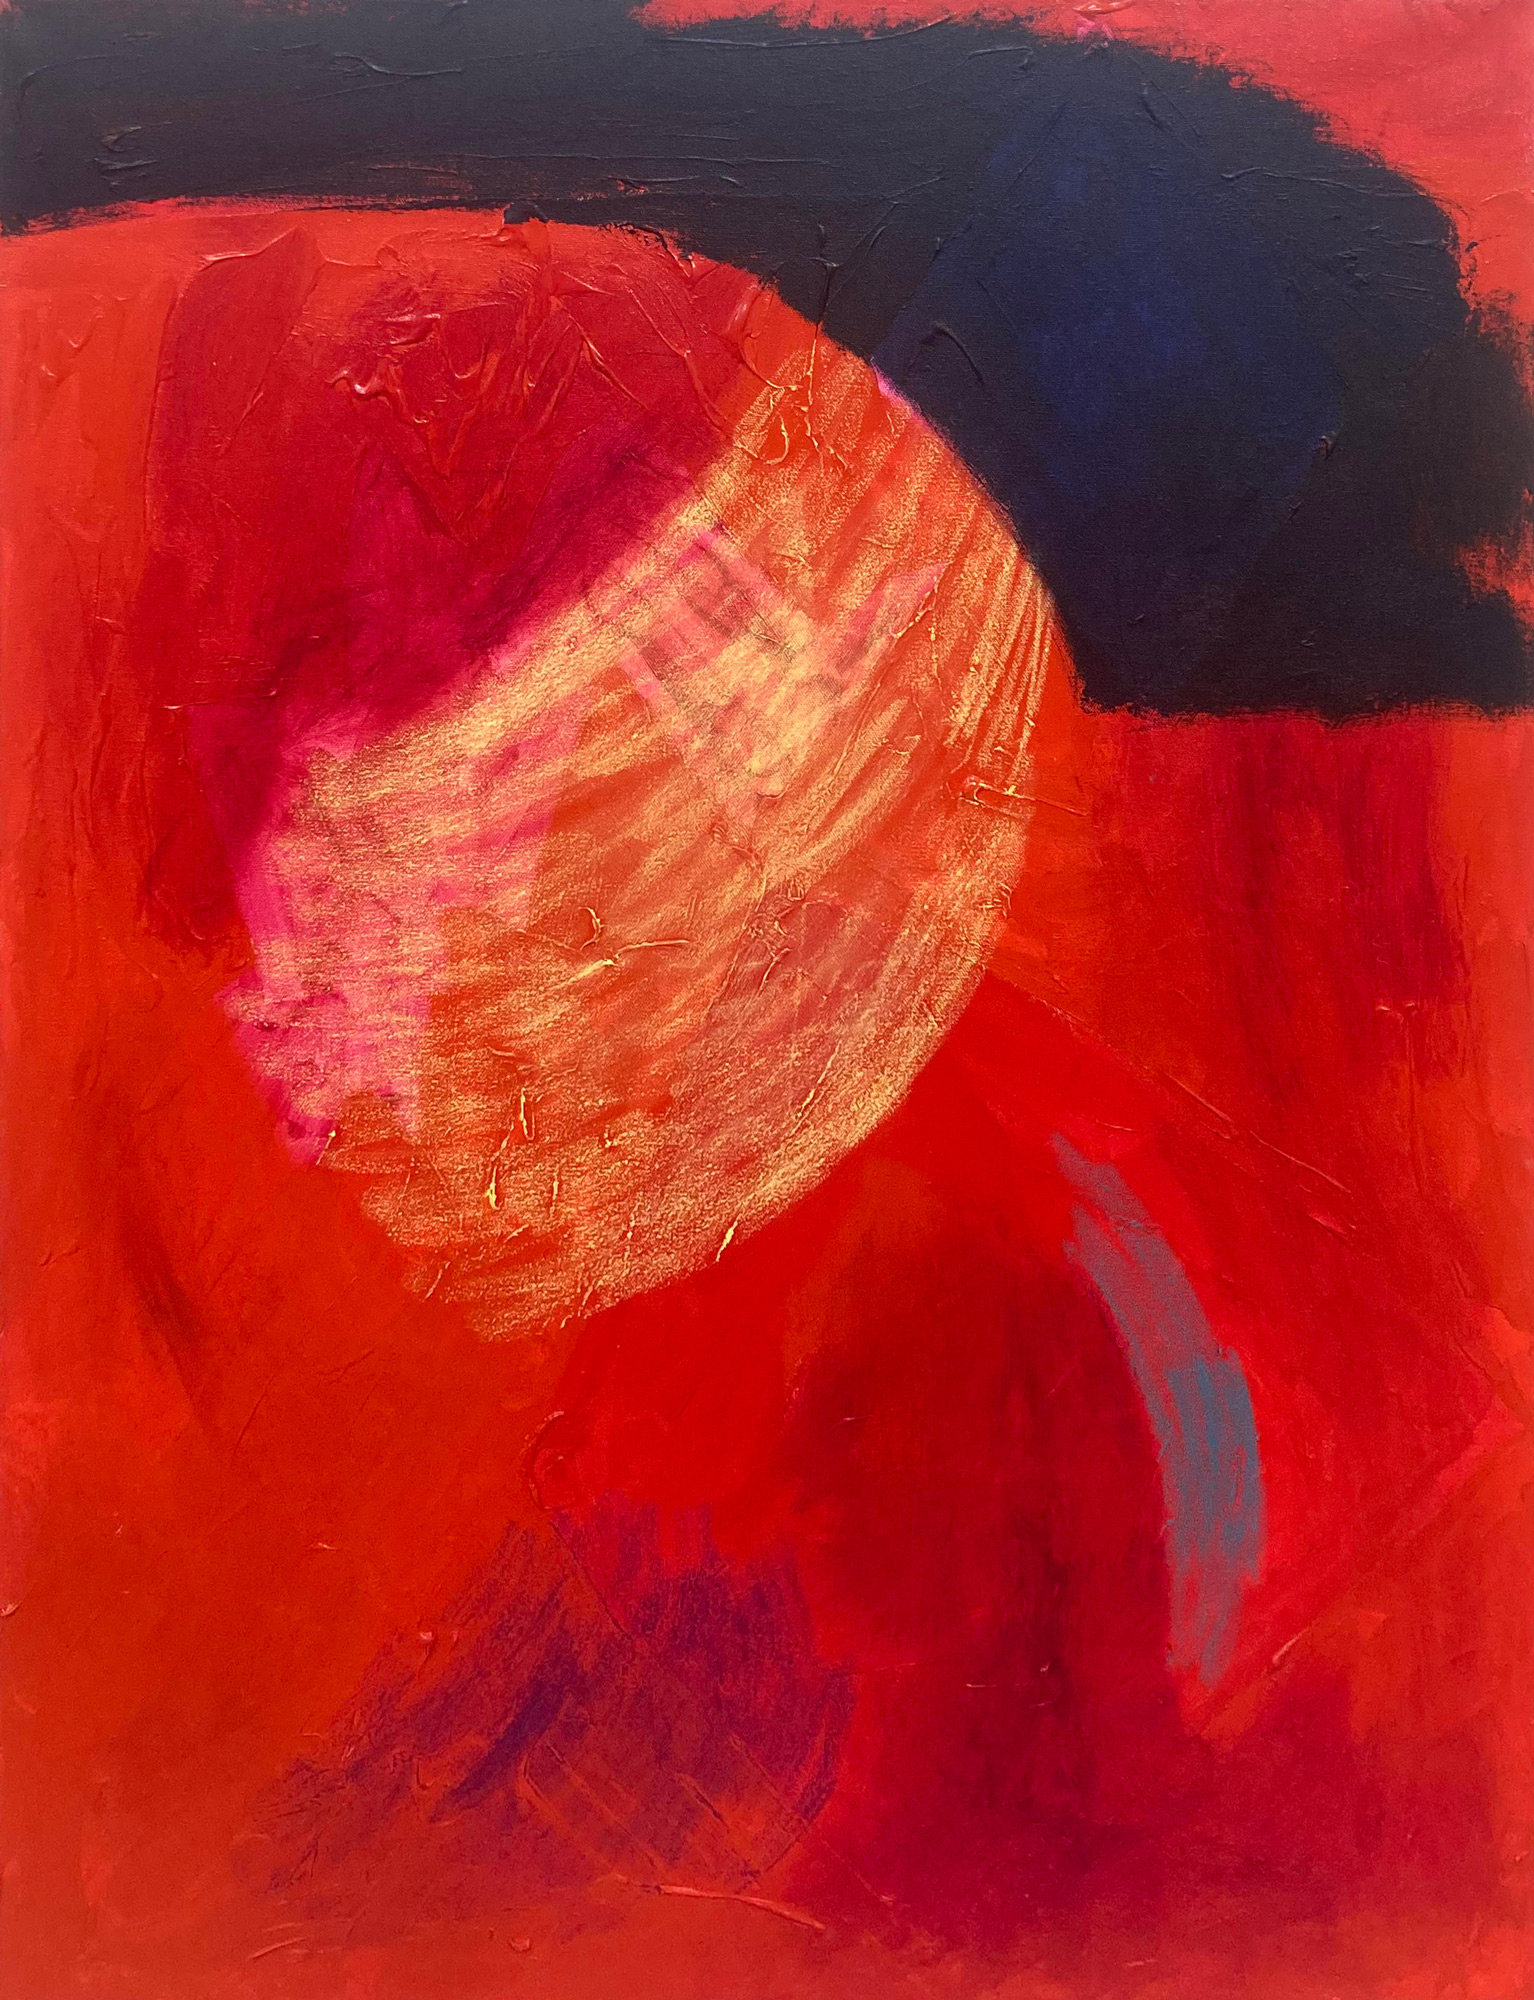 Abstract painting consisting of mostly red with some yellow and blue strokes